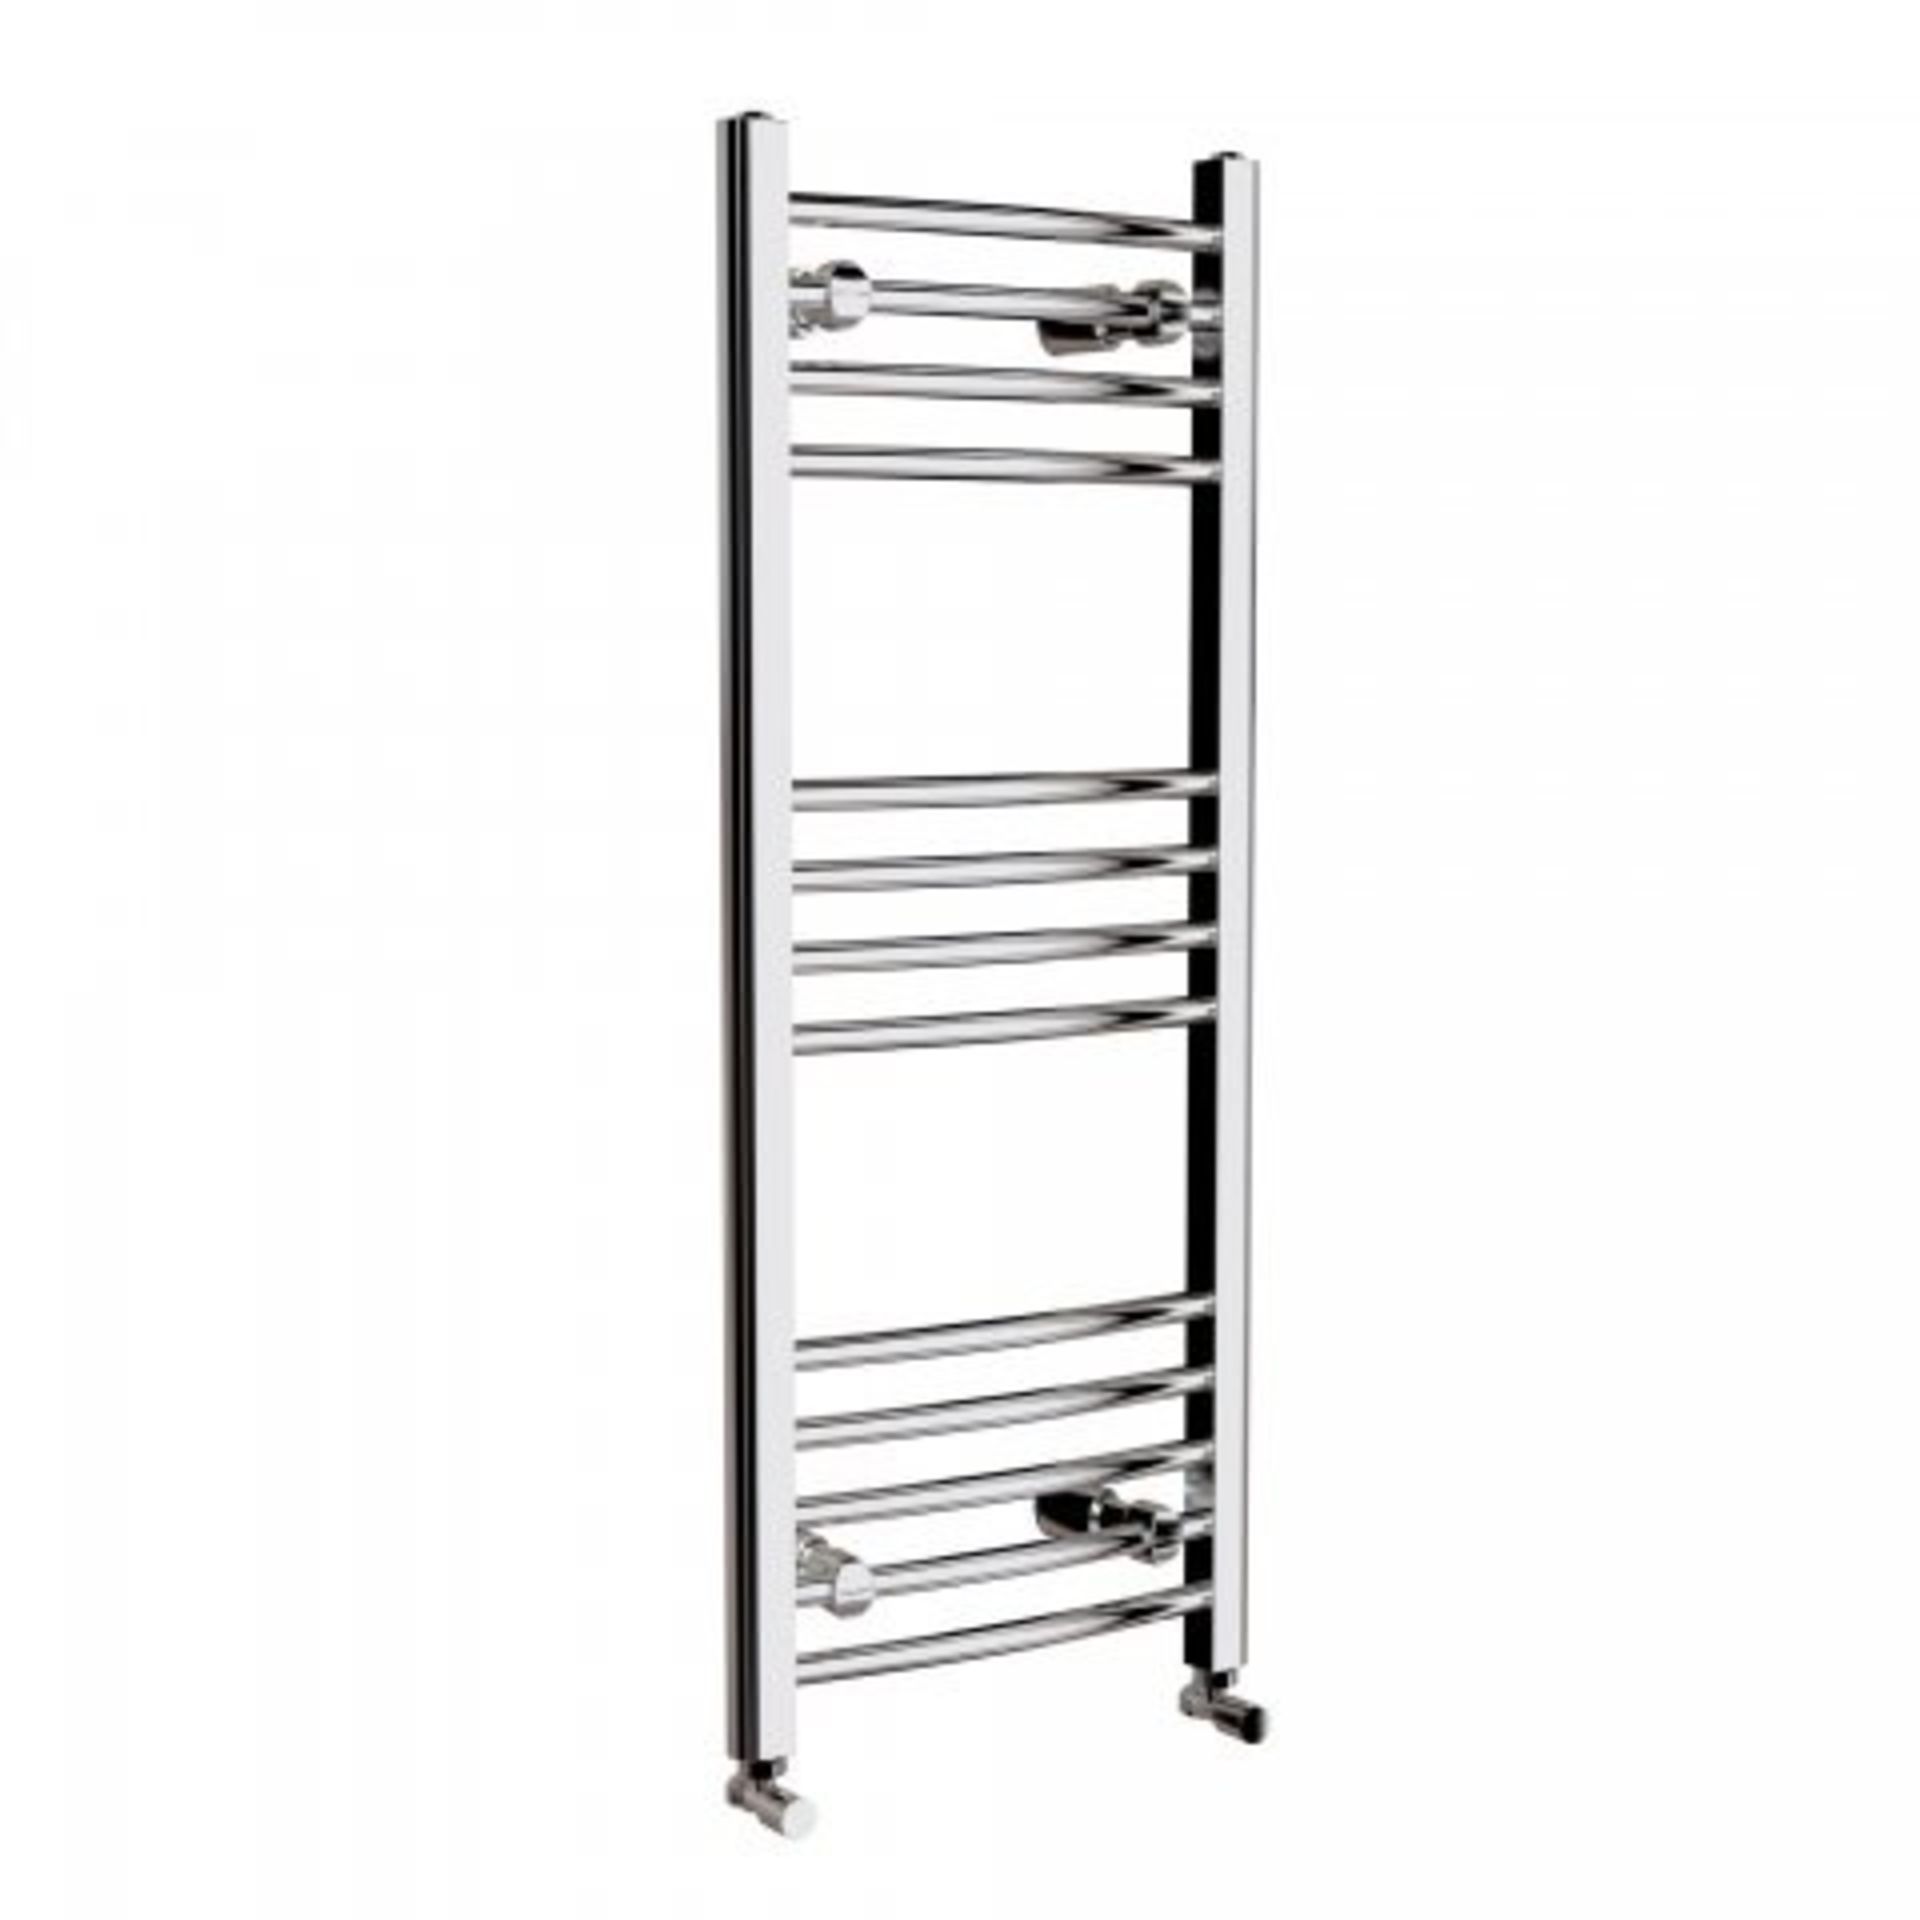 1200x400mm - 20mm Tubes - Chrome Curved Rail Ladder Towel Radiator. NC1200400. Our Nancy 1200x... - Image 3 of 3